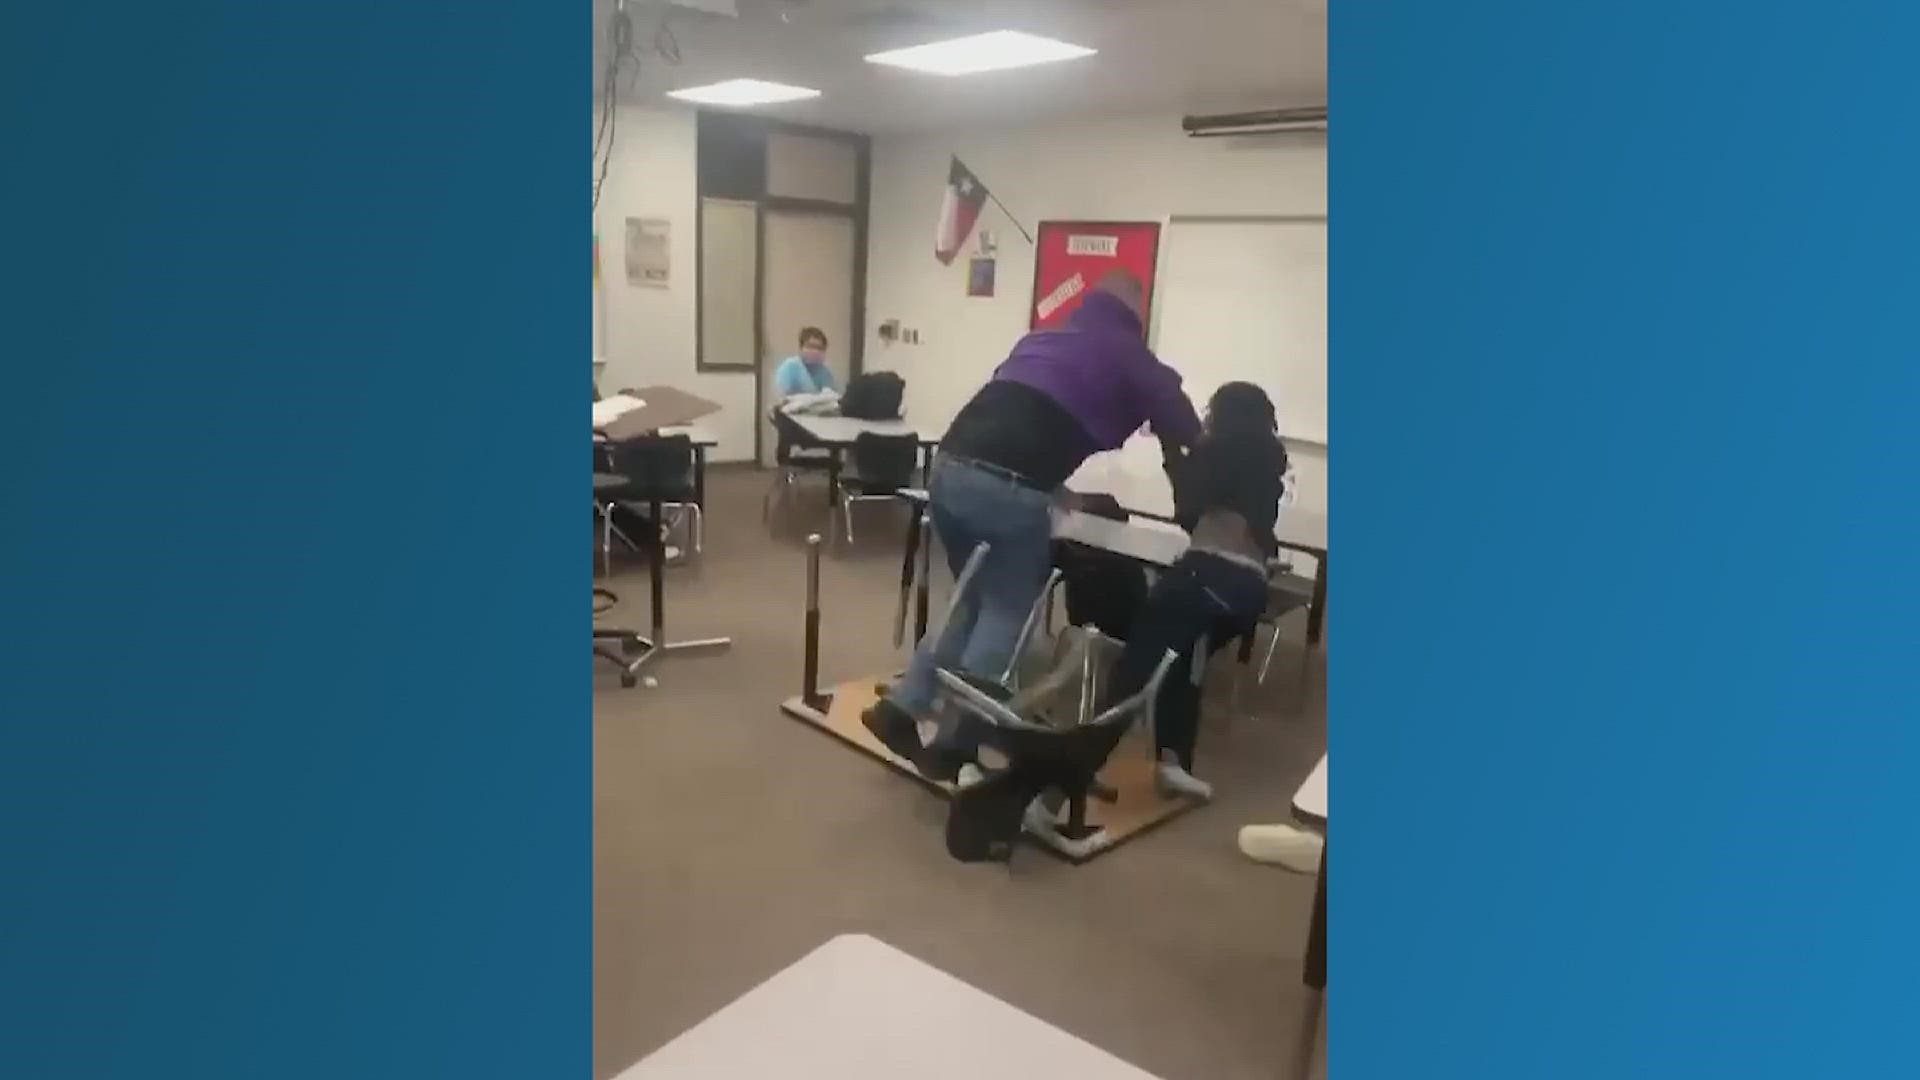 The district said the teacher was helping out in another classroom when he used physical force to try to get a student to take a seat and listen.